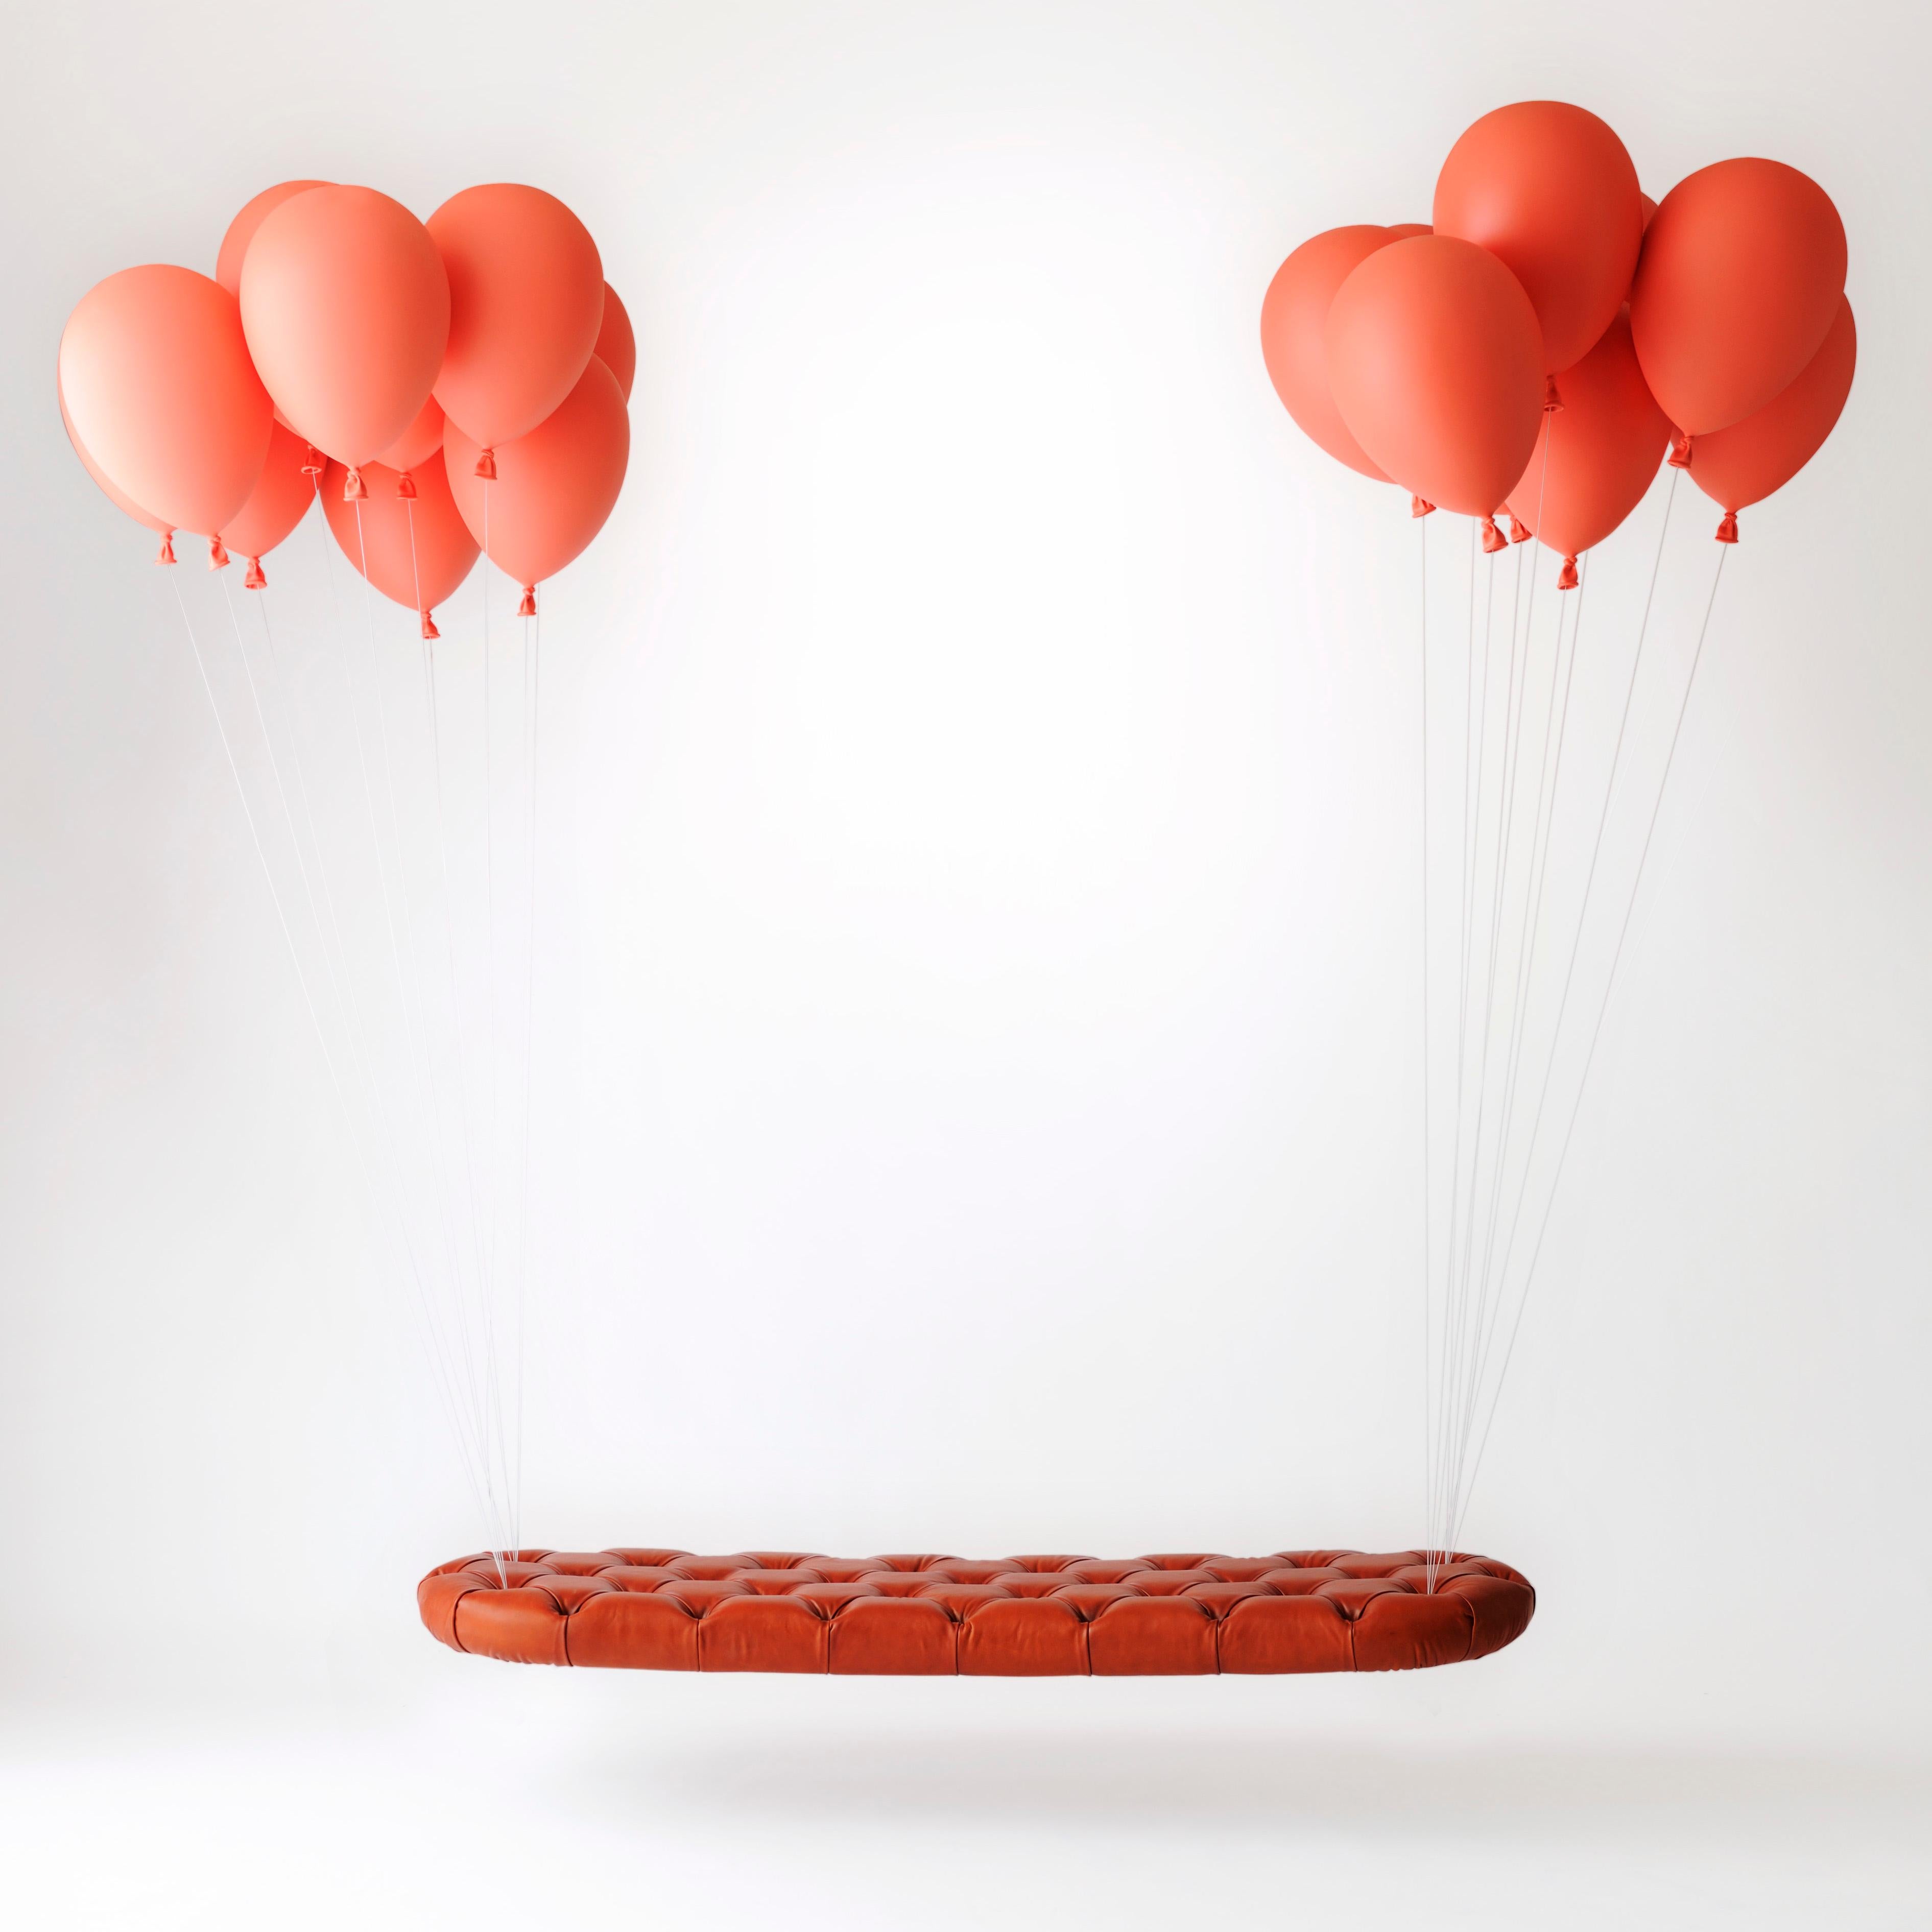 Balloon bench designed by Satoshi Itasaka of h220430
This bench is hanging bench installed to ceiling. Made up of 14balloons and seat.
Balloon is FRP, thread is steel wire. Bench is made of upholstered fabric, leather, or fake leather. Made to